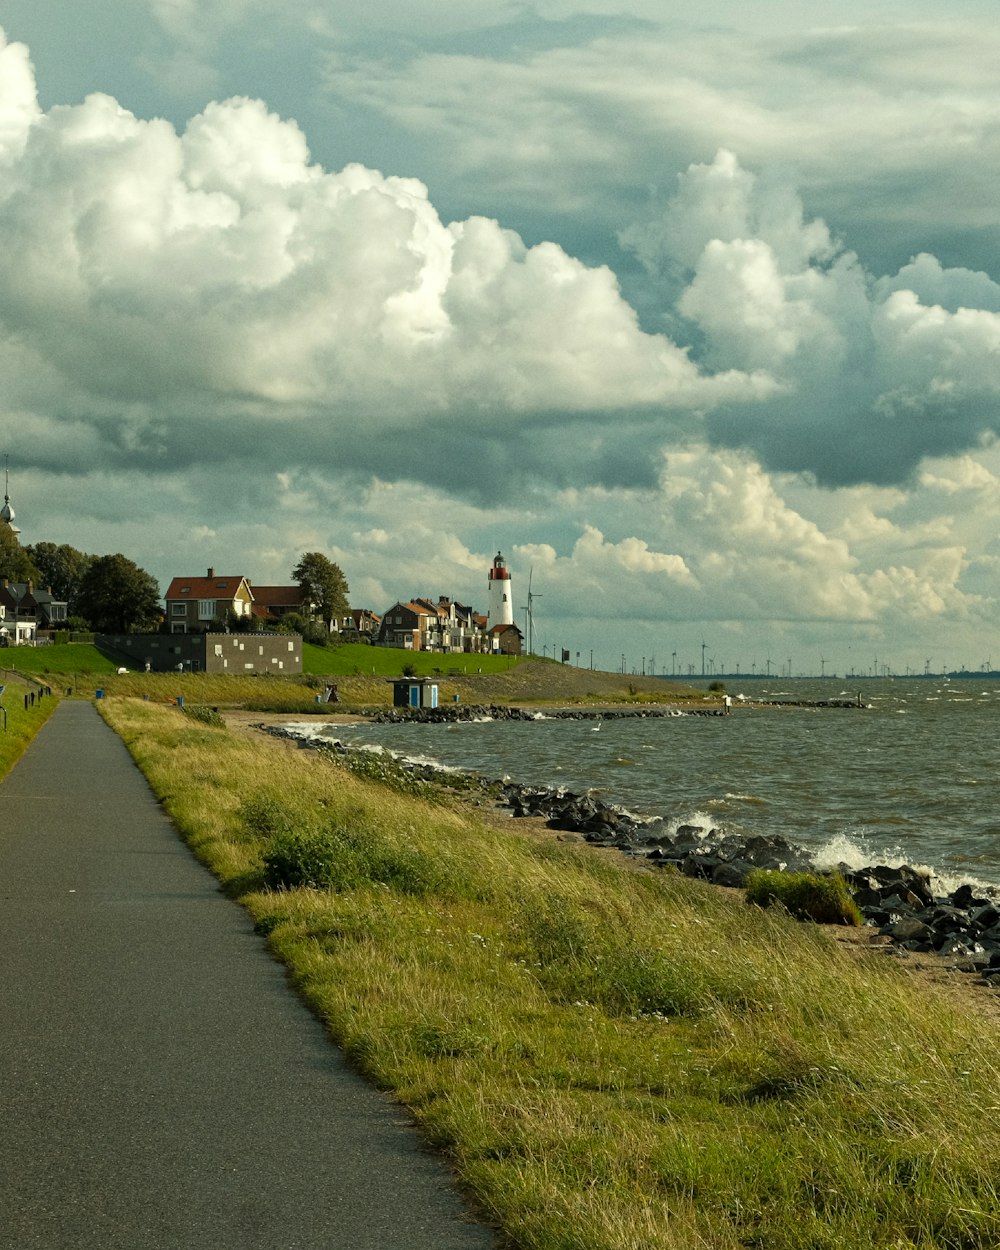 a paved path next to a body of water